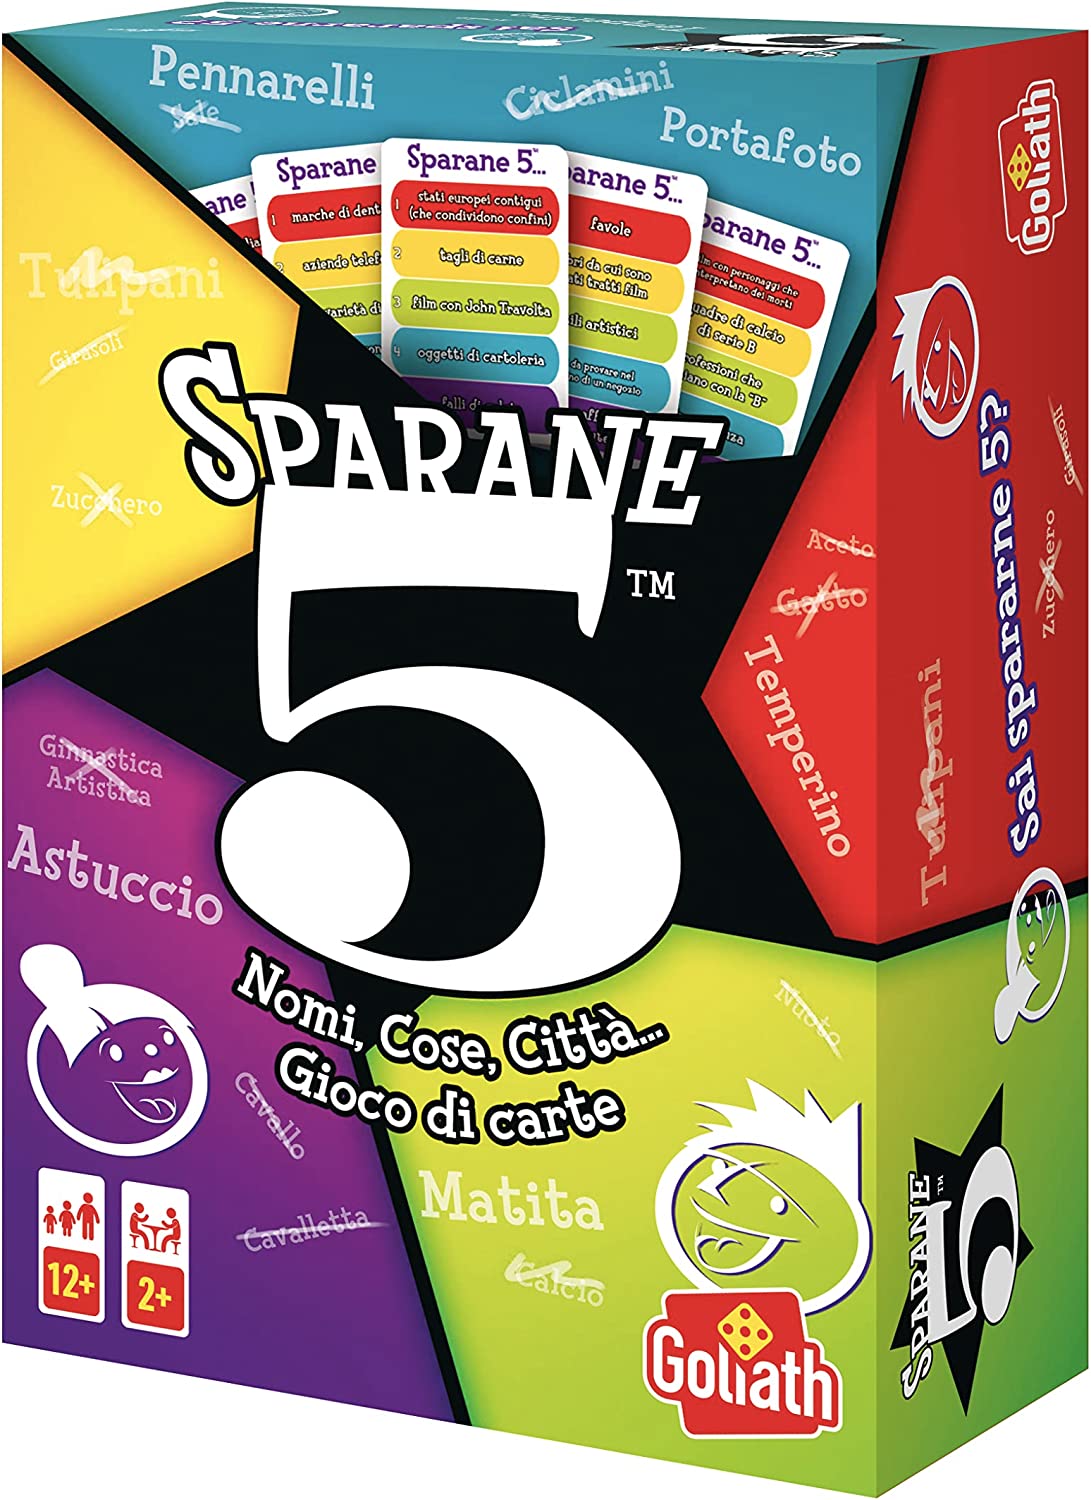 SPARANE 5 (NAMES, THINGS, CITIES, ANIMALS ...)